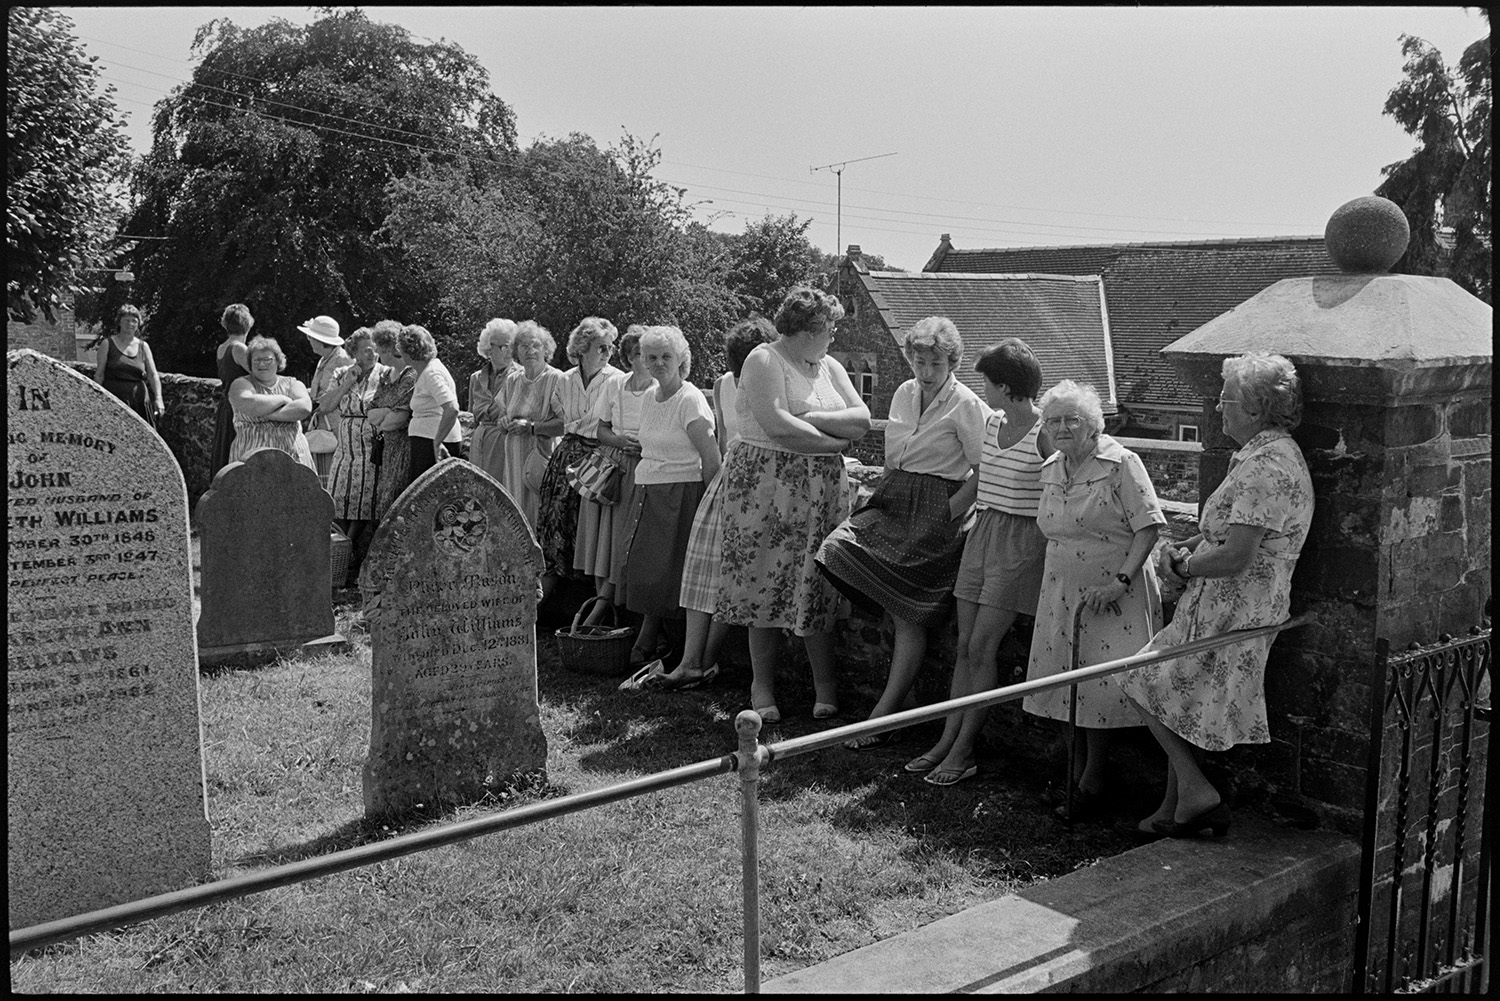 Wedding spectators, bride, groom, bridesmaids being photographed Photographer changing film.
[A line of women leaning against the wall of the churchyard of the Church of St Mary Magdalene, Chulmleigh waiting to see a wedding. Chulmleigh School can be seen in the background.]